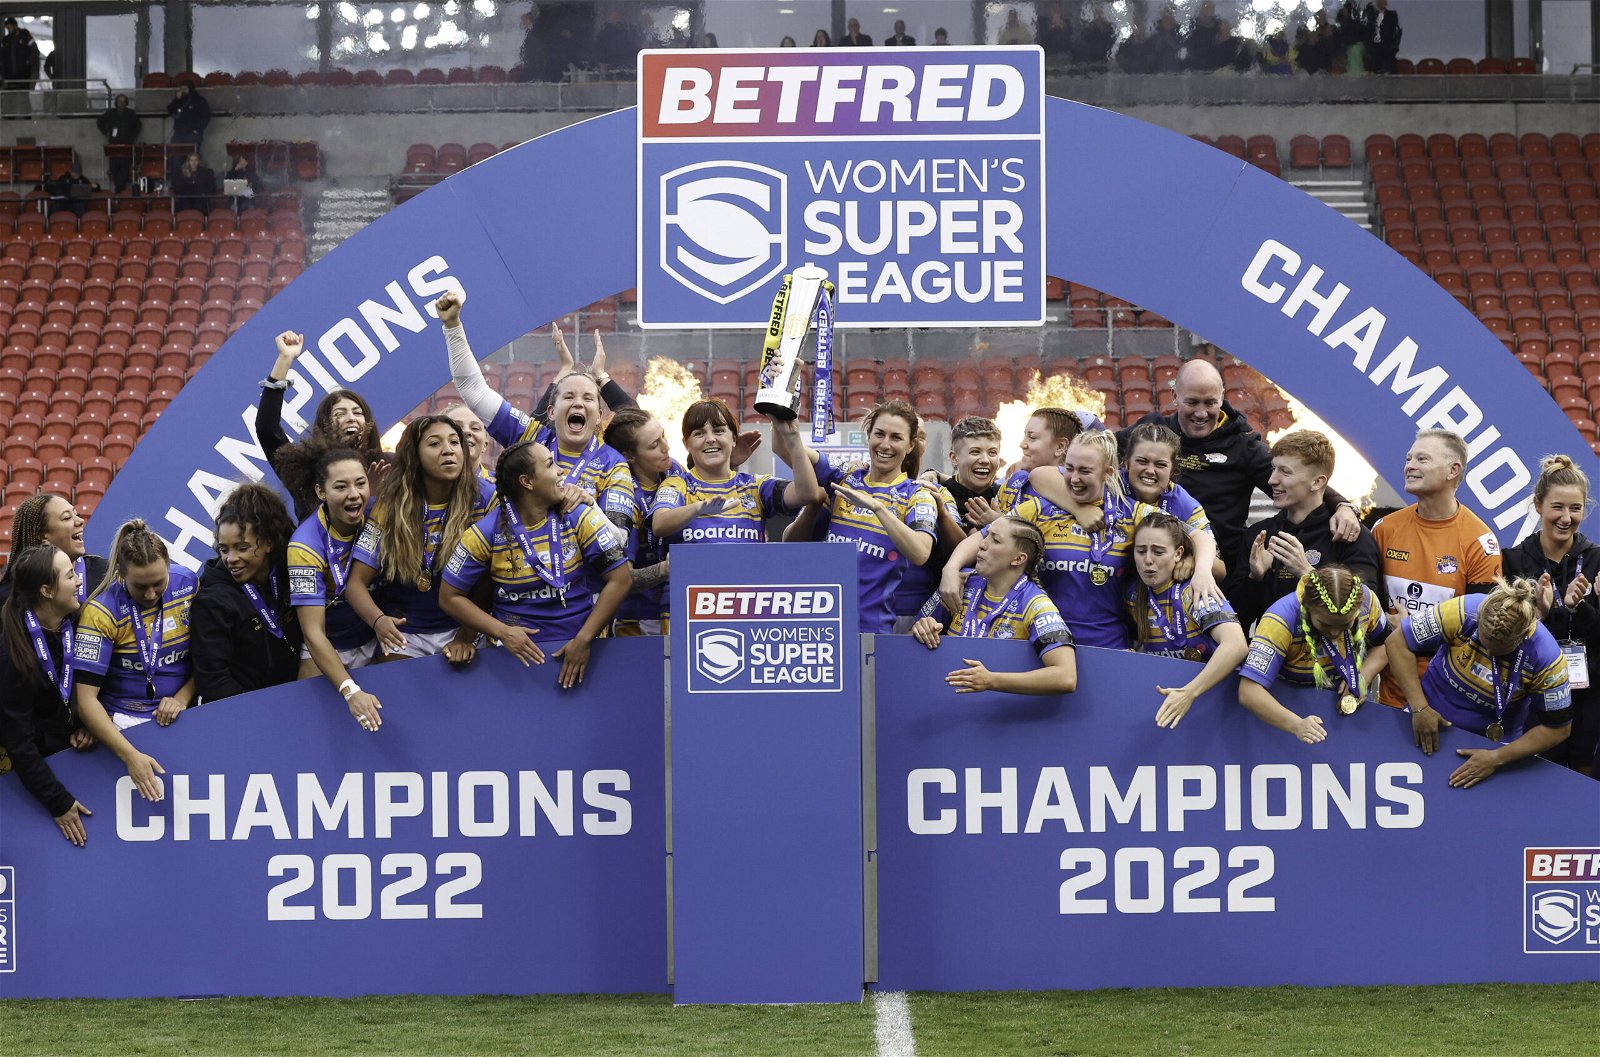 2023 BETFRED CHAMPIONSHIP FIXTURES REVEALED